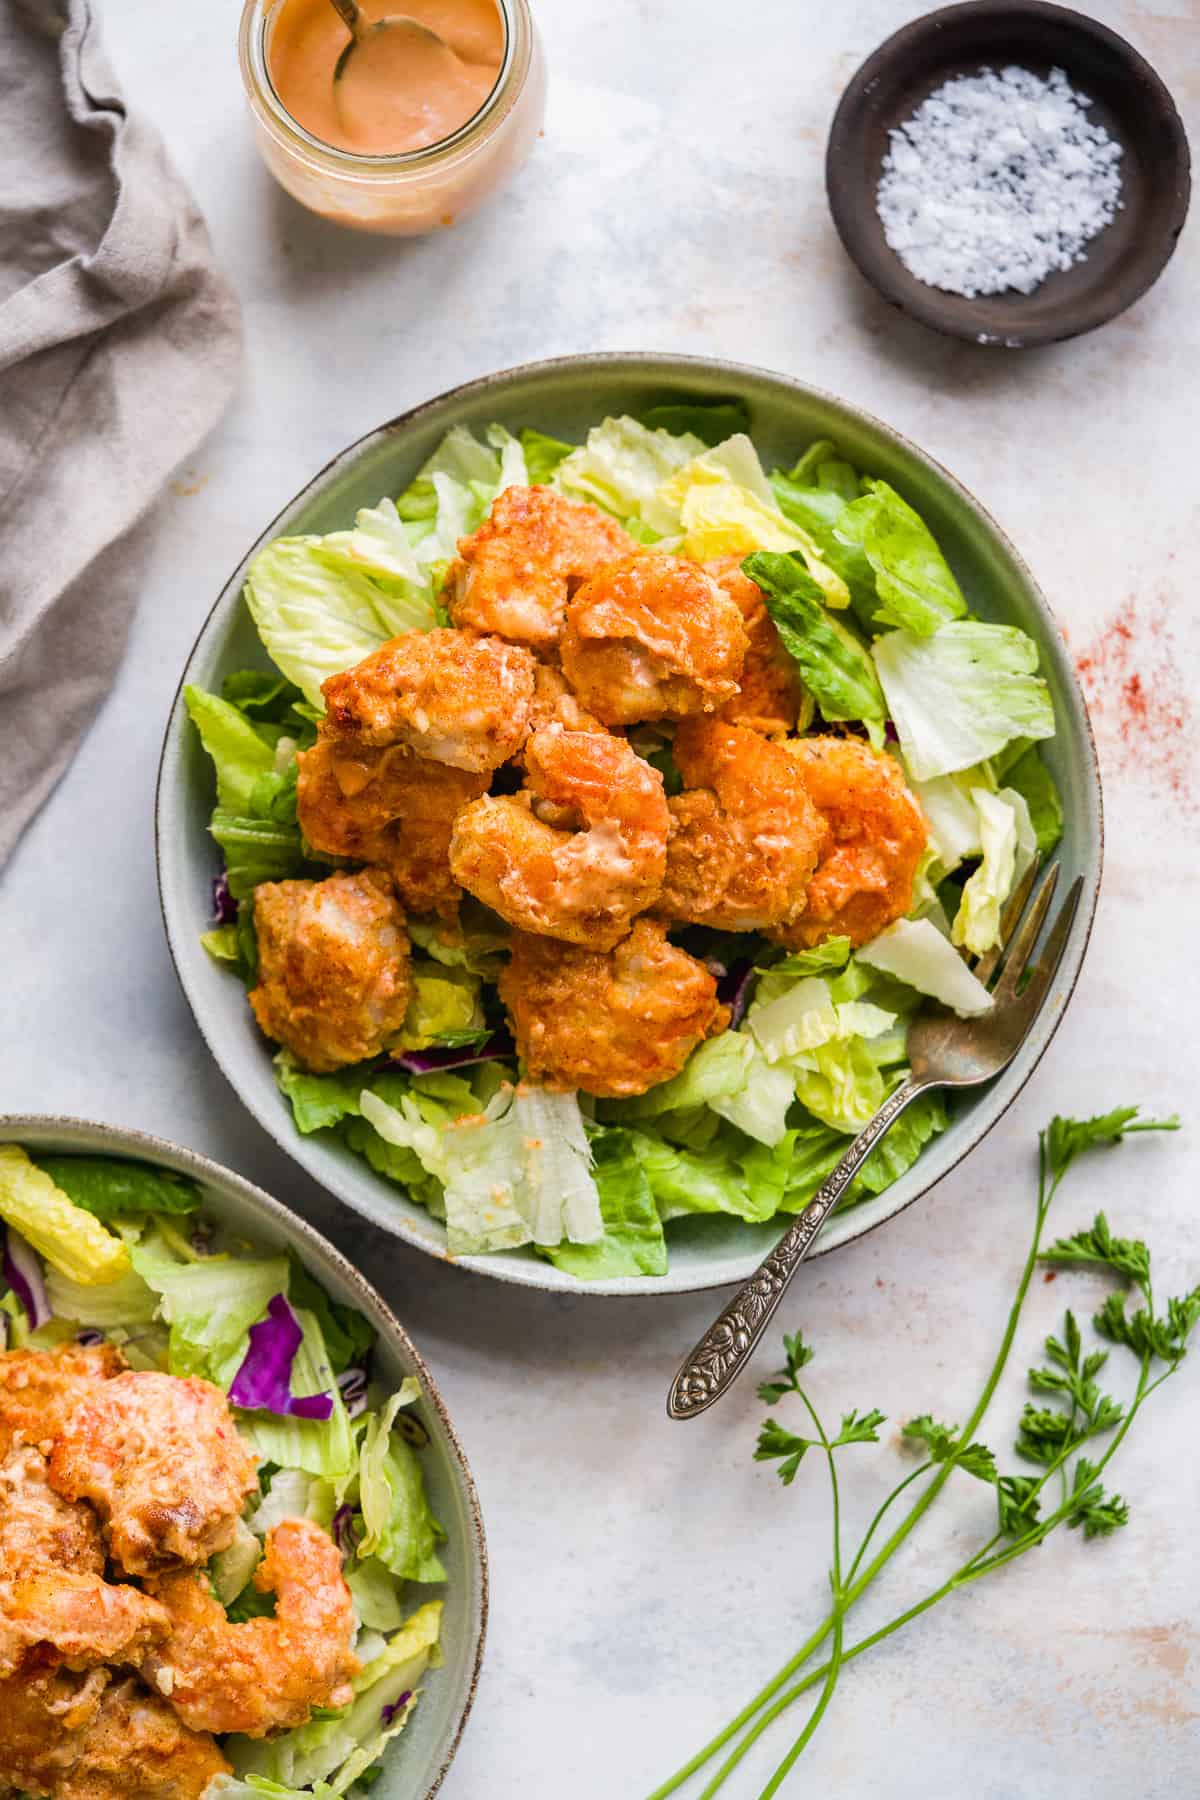 Overhead view of a plate of lettuce with bang bang shrimp on top.